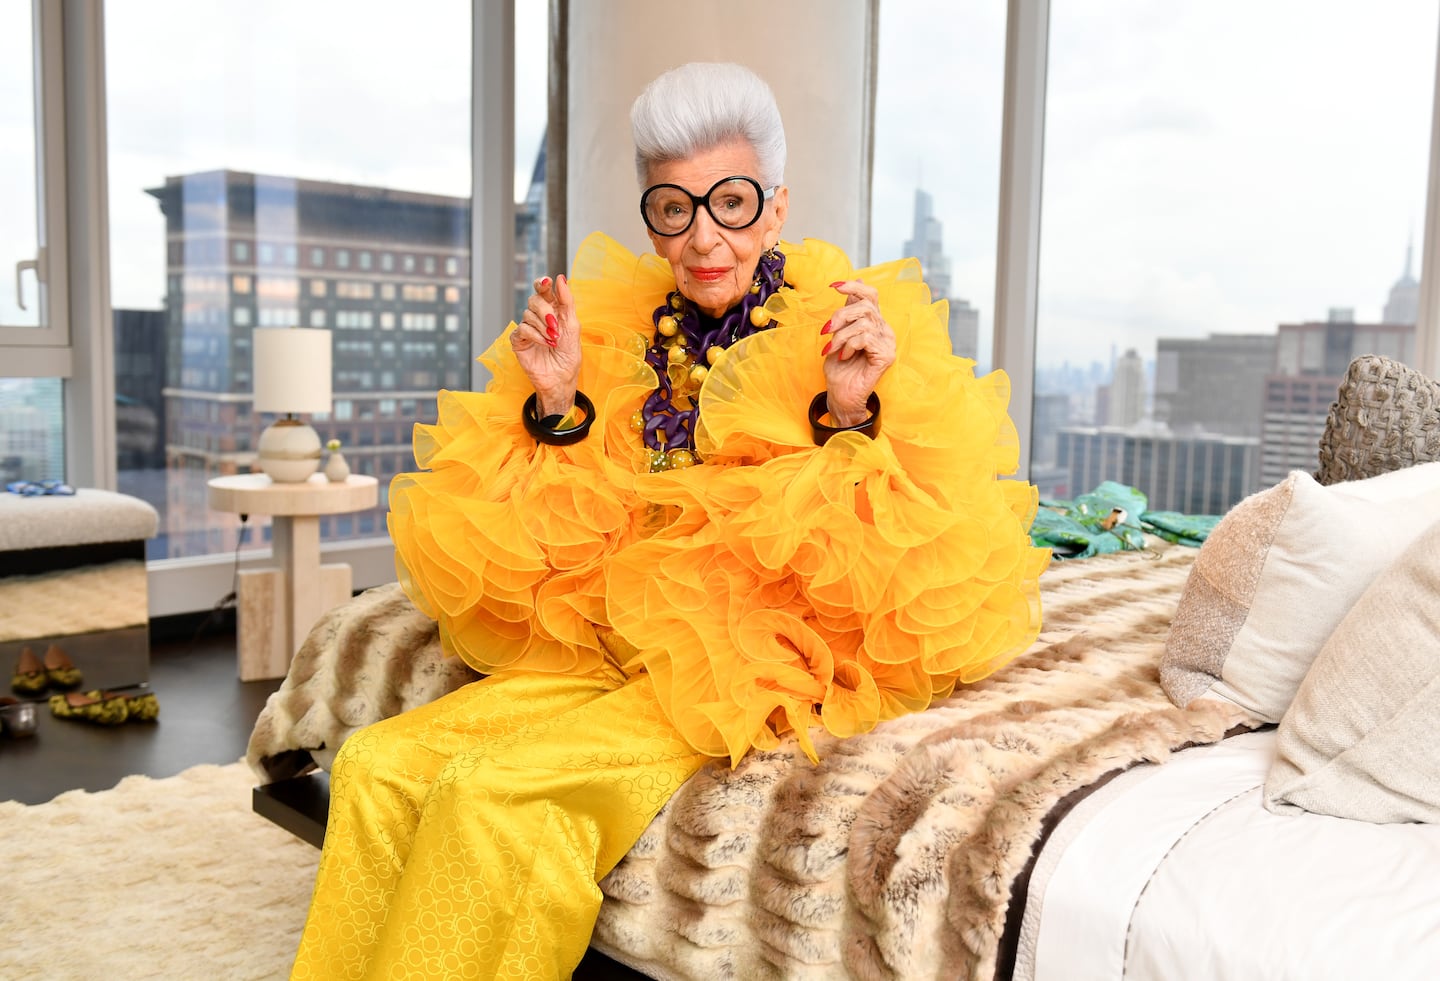 Iris Apfel sits for a portrait during her 100th Birthday Party in New York.